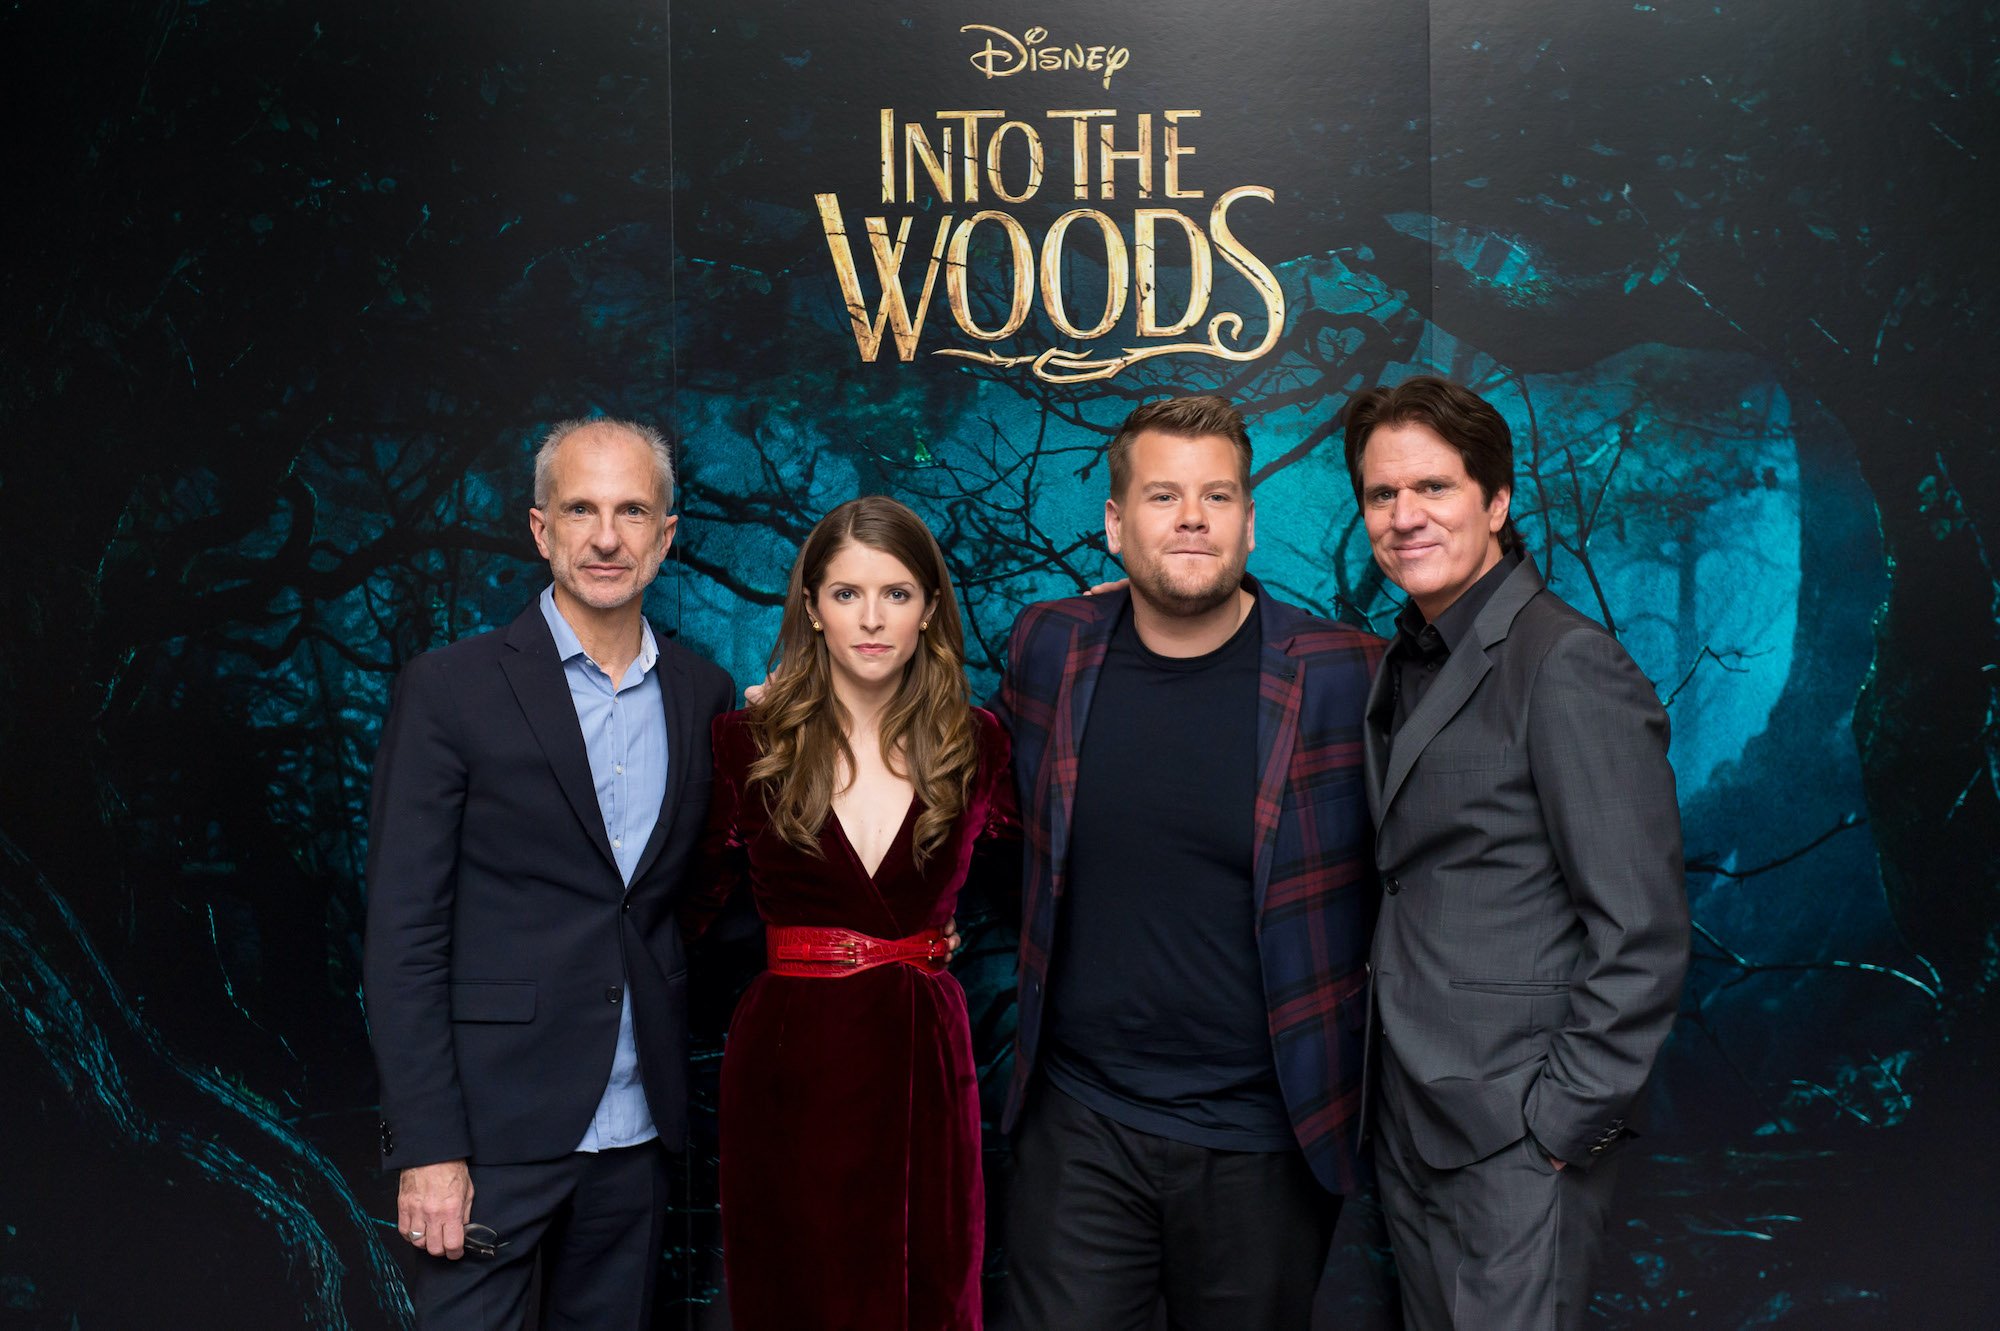 (L-R) Producer John DeLuca, Anna Kendrick, James Corden and Director Rob Marshall attend a photocall for "Into The Woods" at Corinthia Hotel London